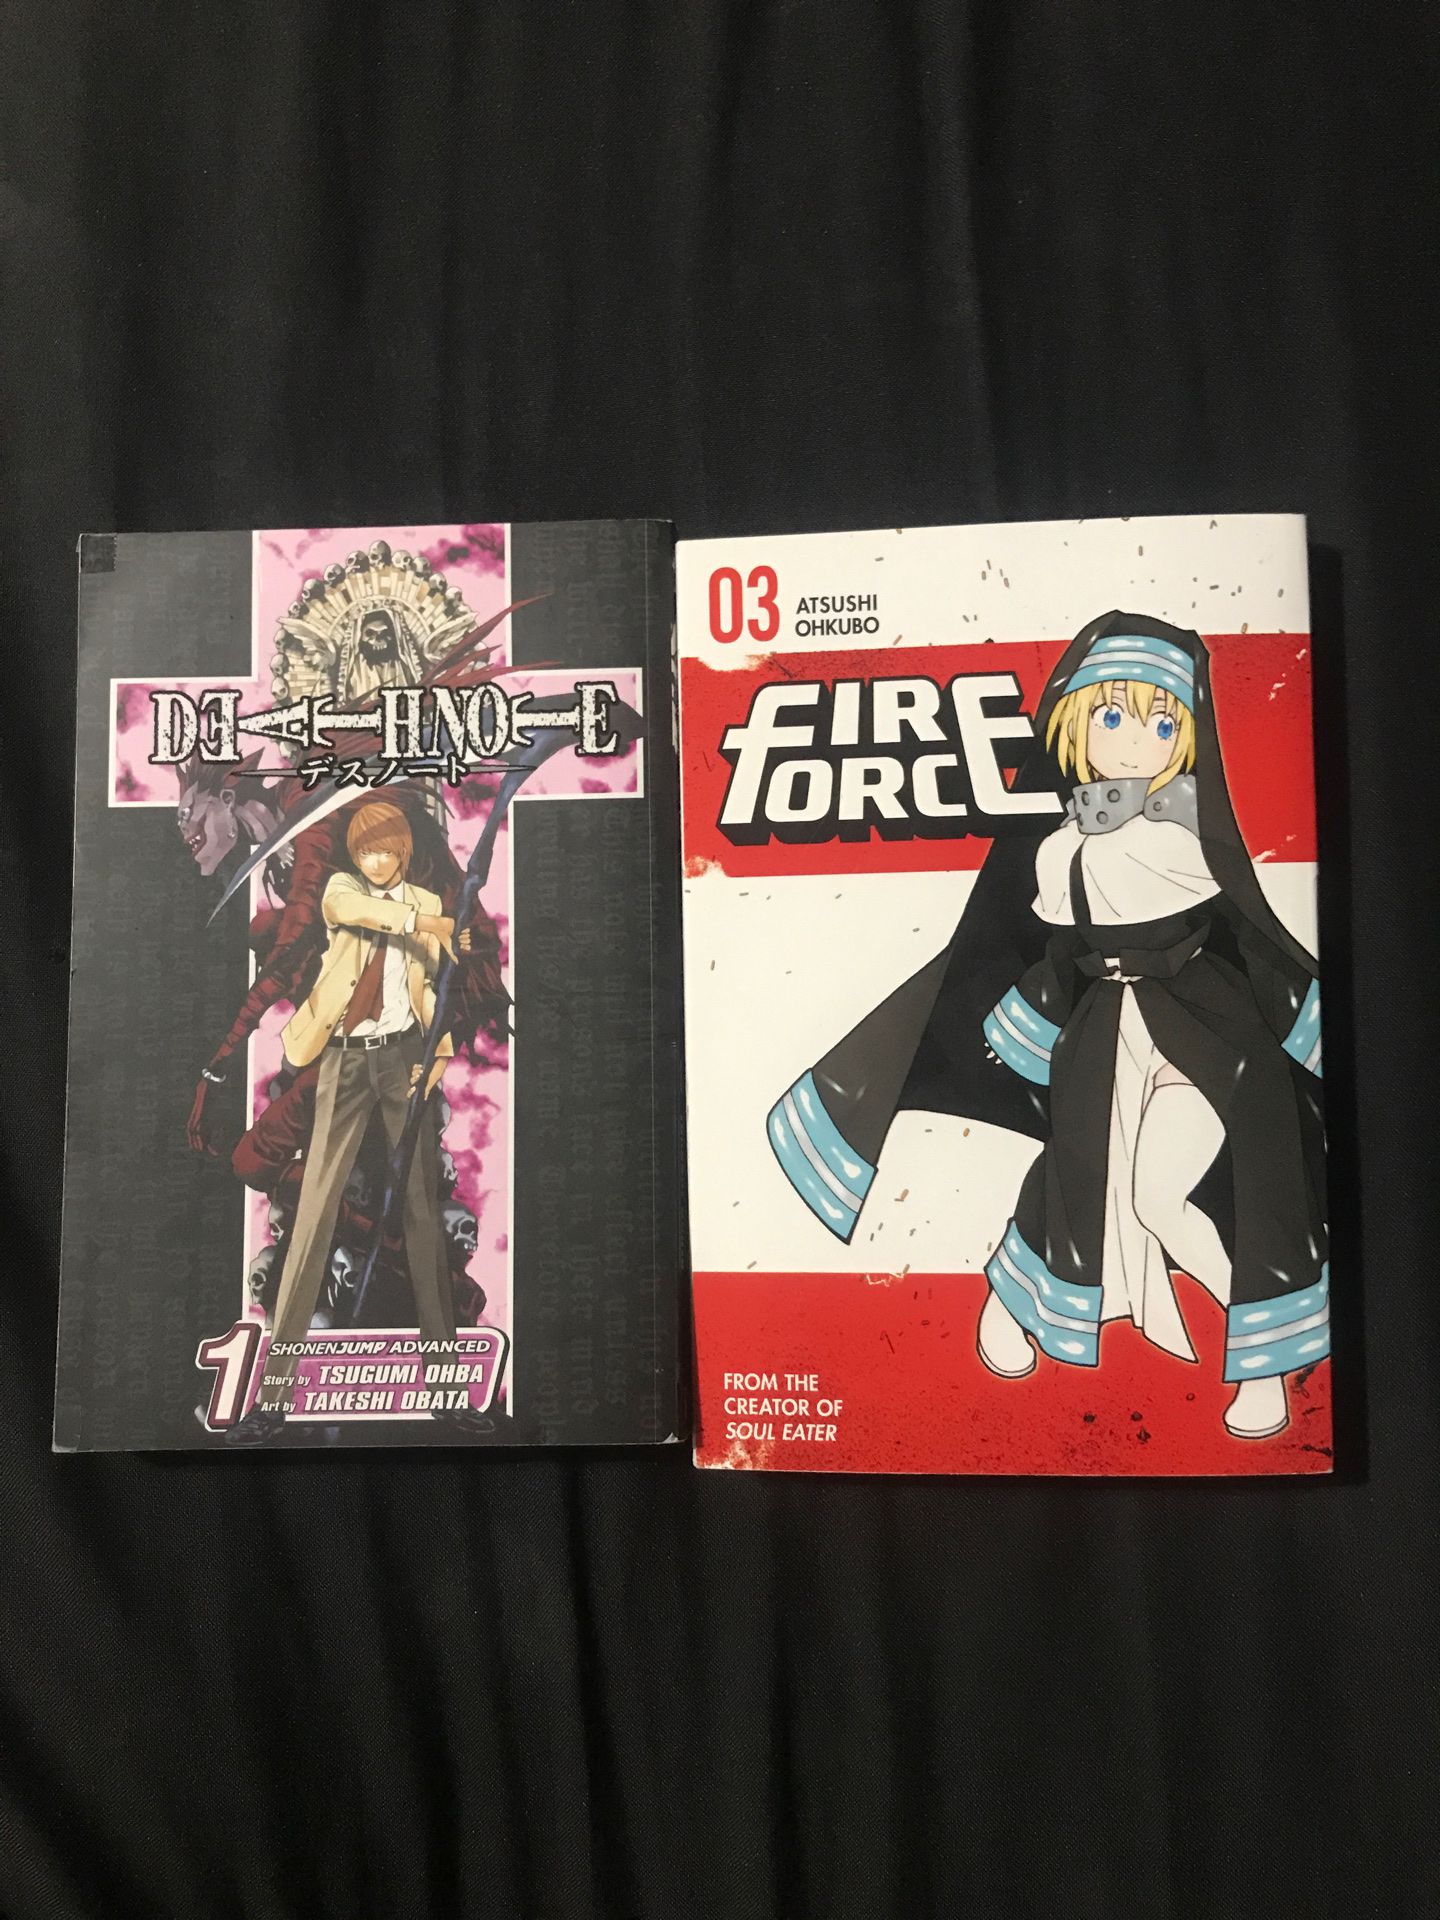 Anime Fire force Deathnote books